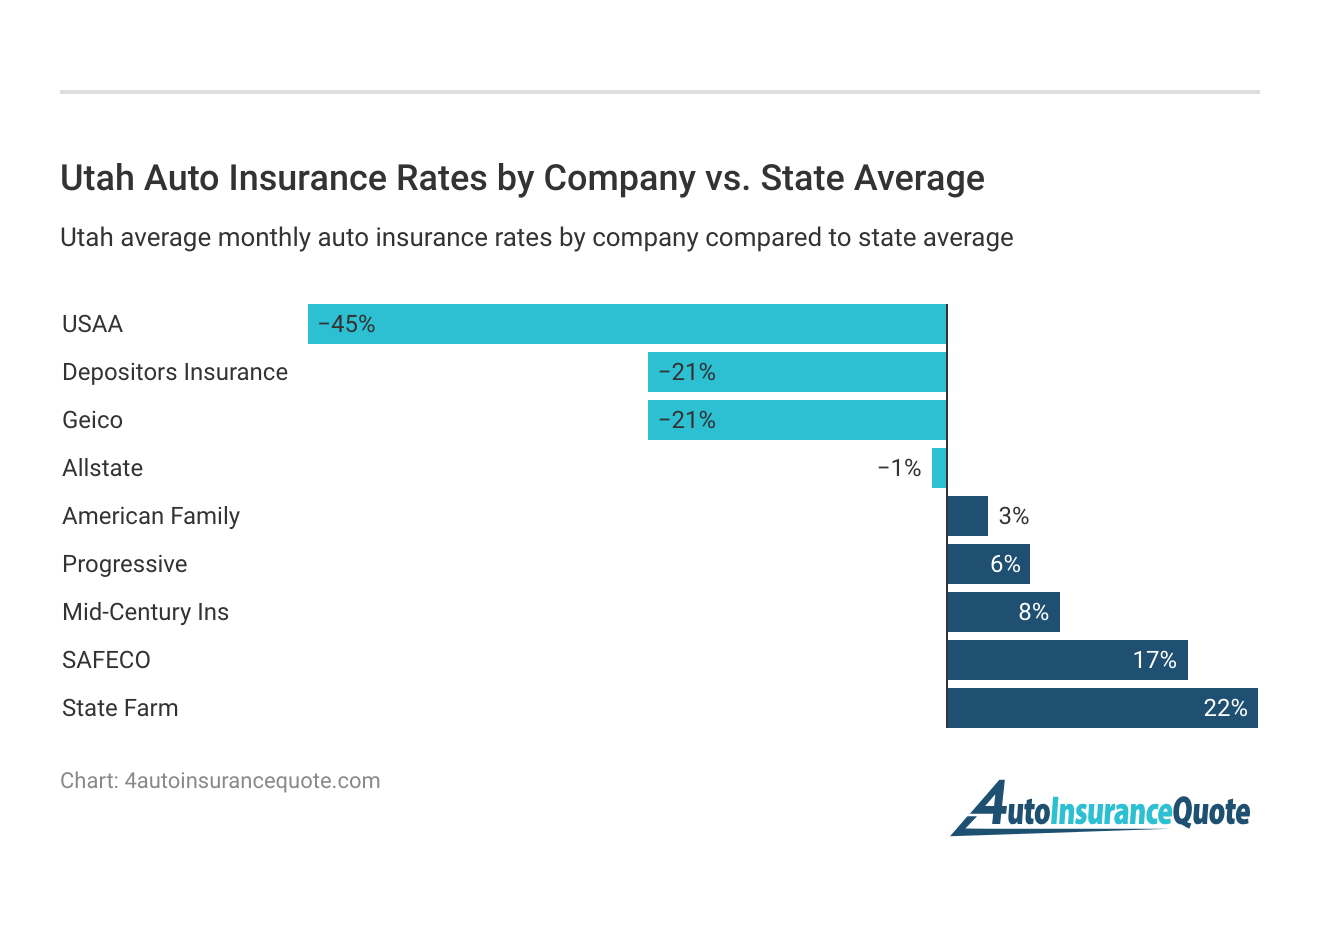 <h3>Utah Auto Insurance Rates by Company vs. State Average</h3>